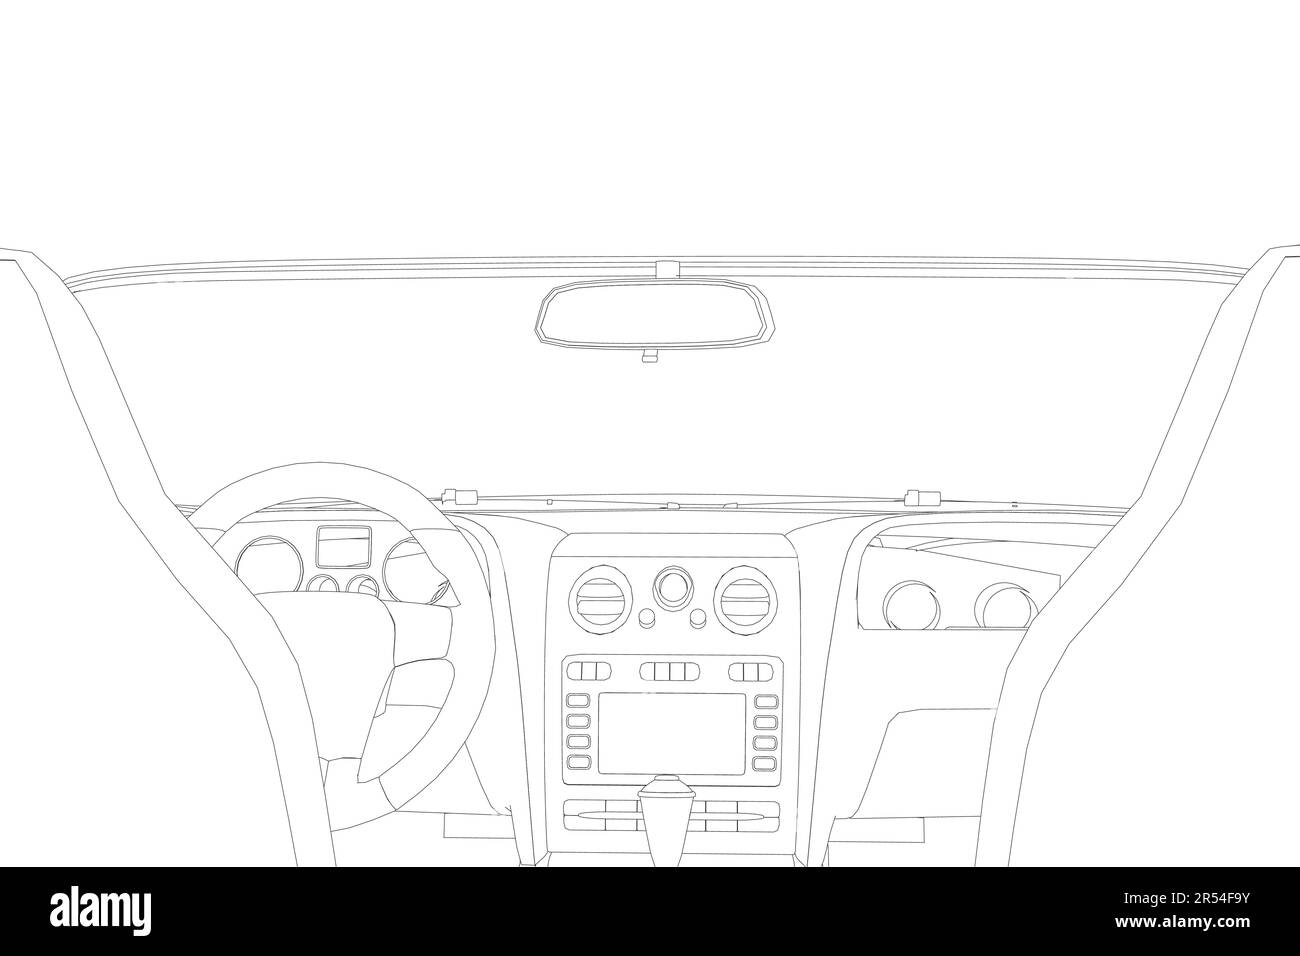 Luxurious beige contour car interior vector illustration. Car outline interior. View from drivers seat.. Stock Vector